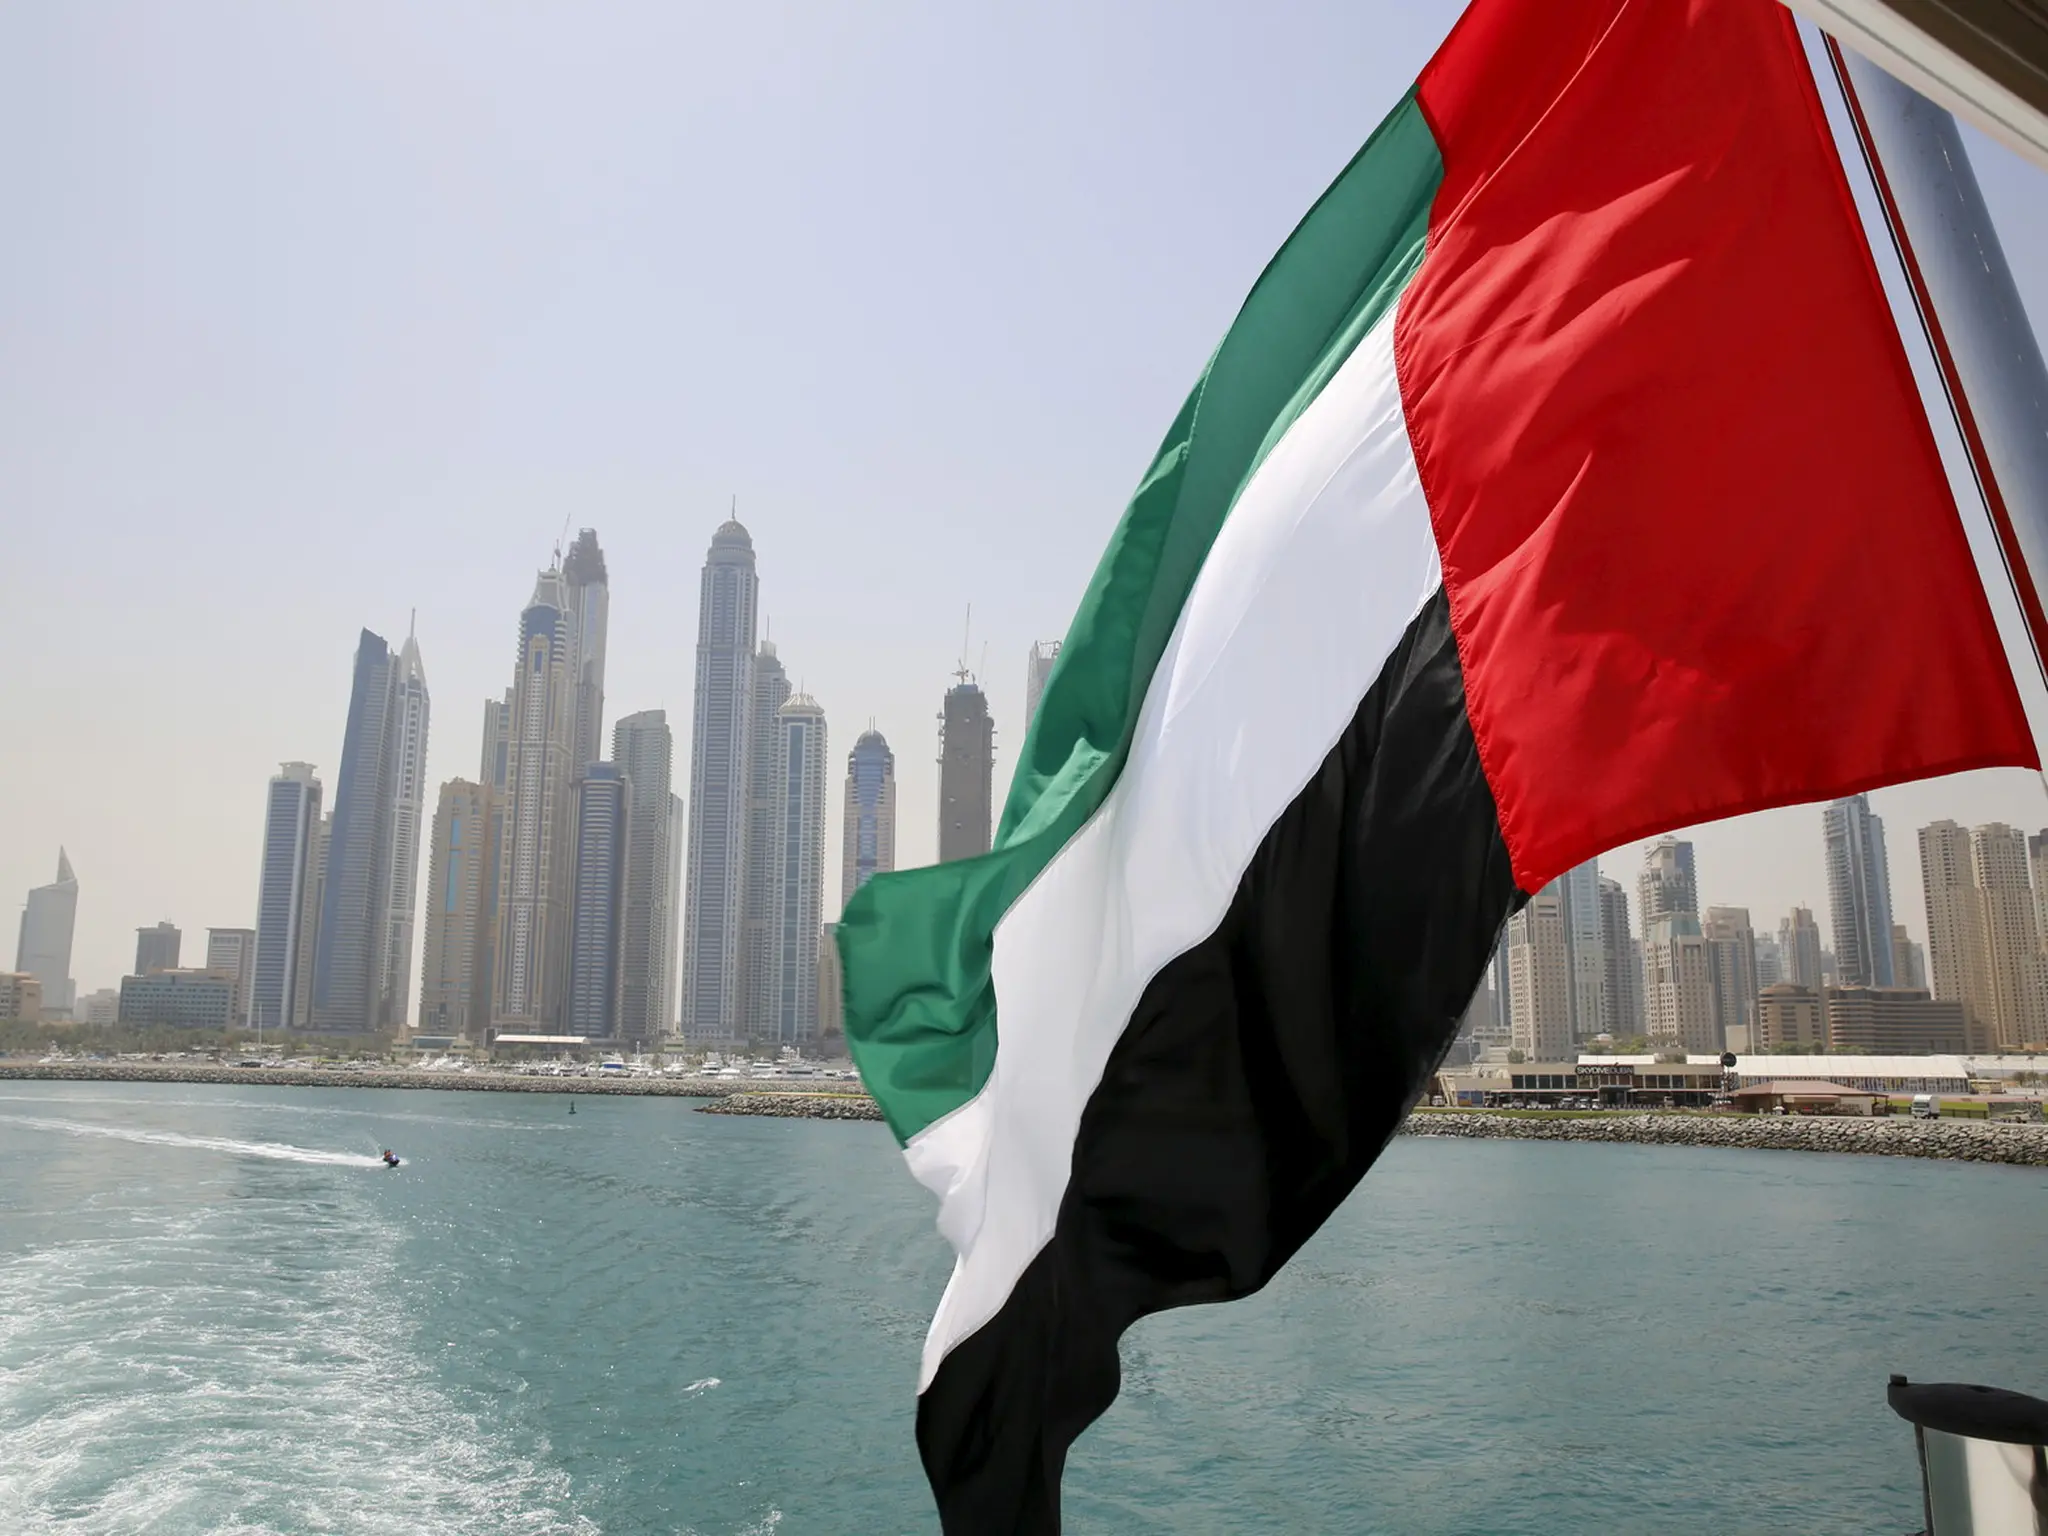 UAE: An important warning to citizens and residents, starting today